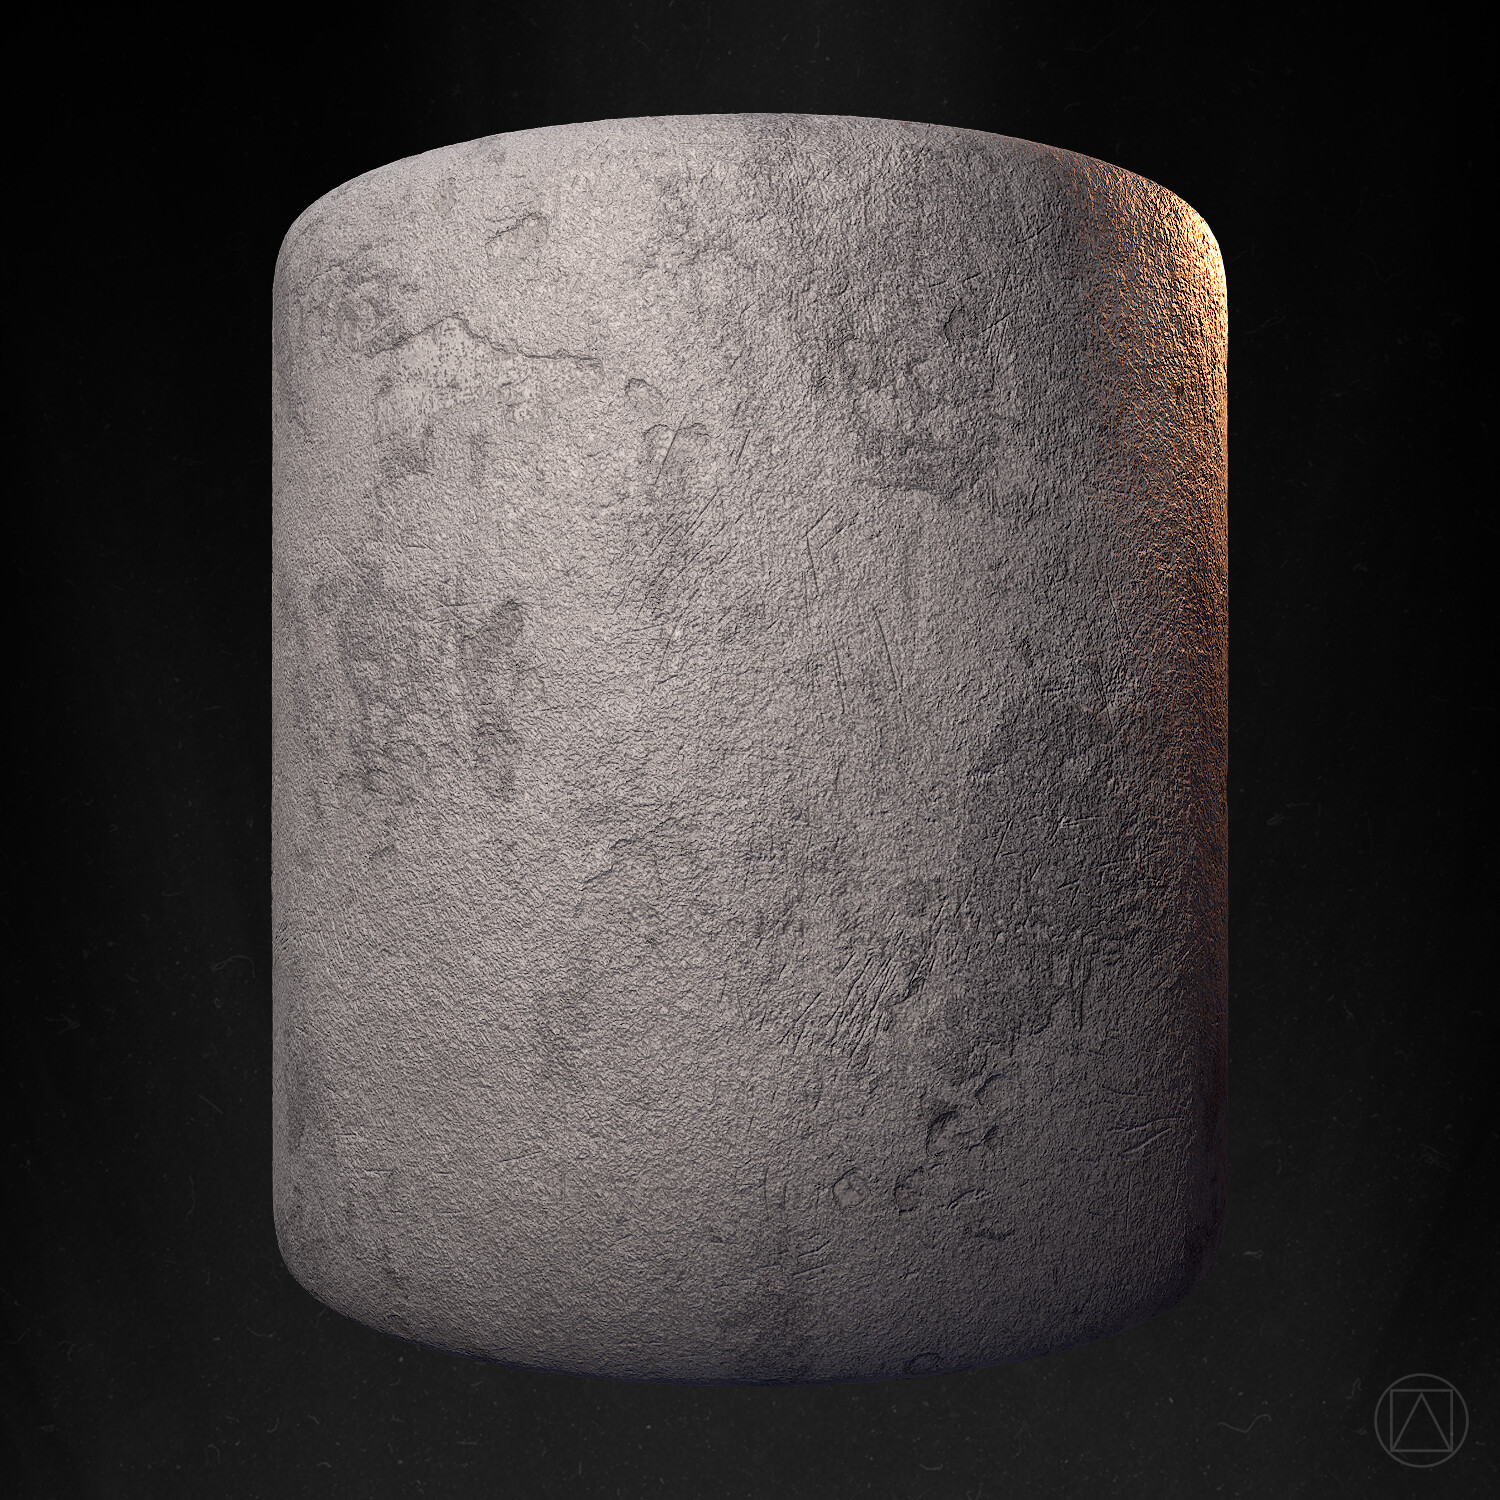 100% Substance Designer, rendered in Marmoset Toolbag 4 with RTX.